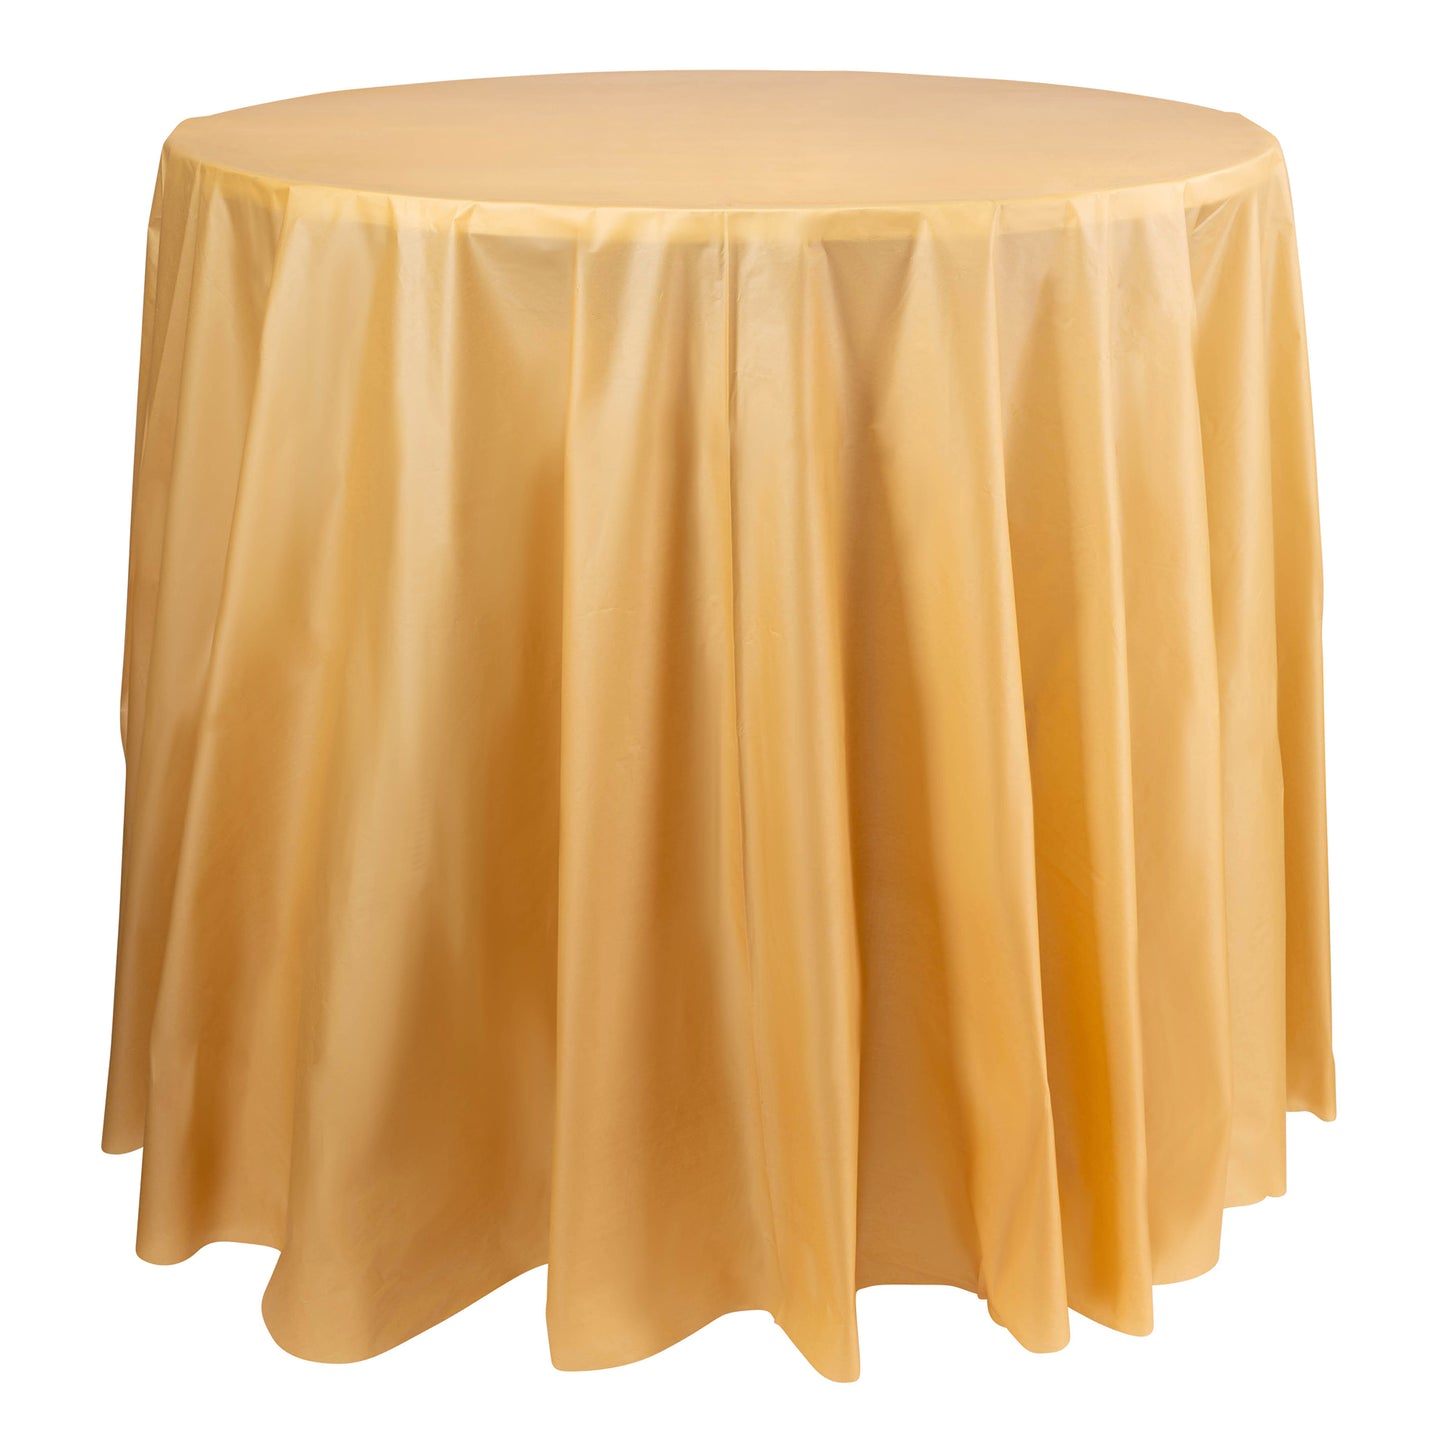 Gold Round Plastic Tablecloths (84")